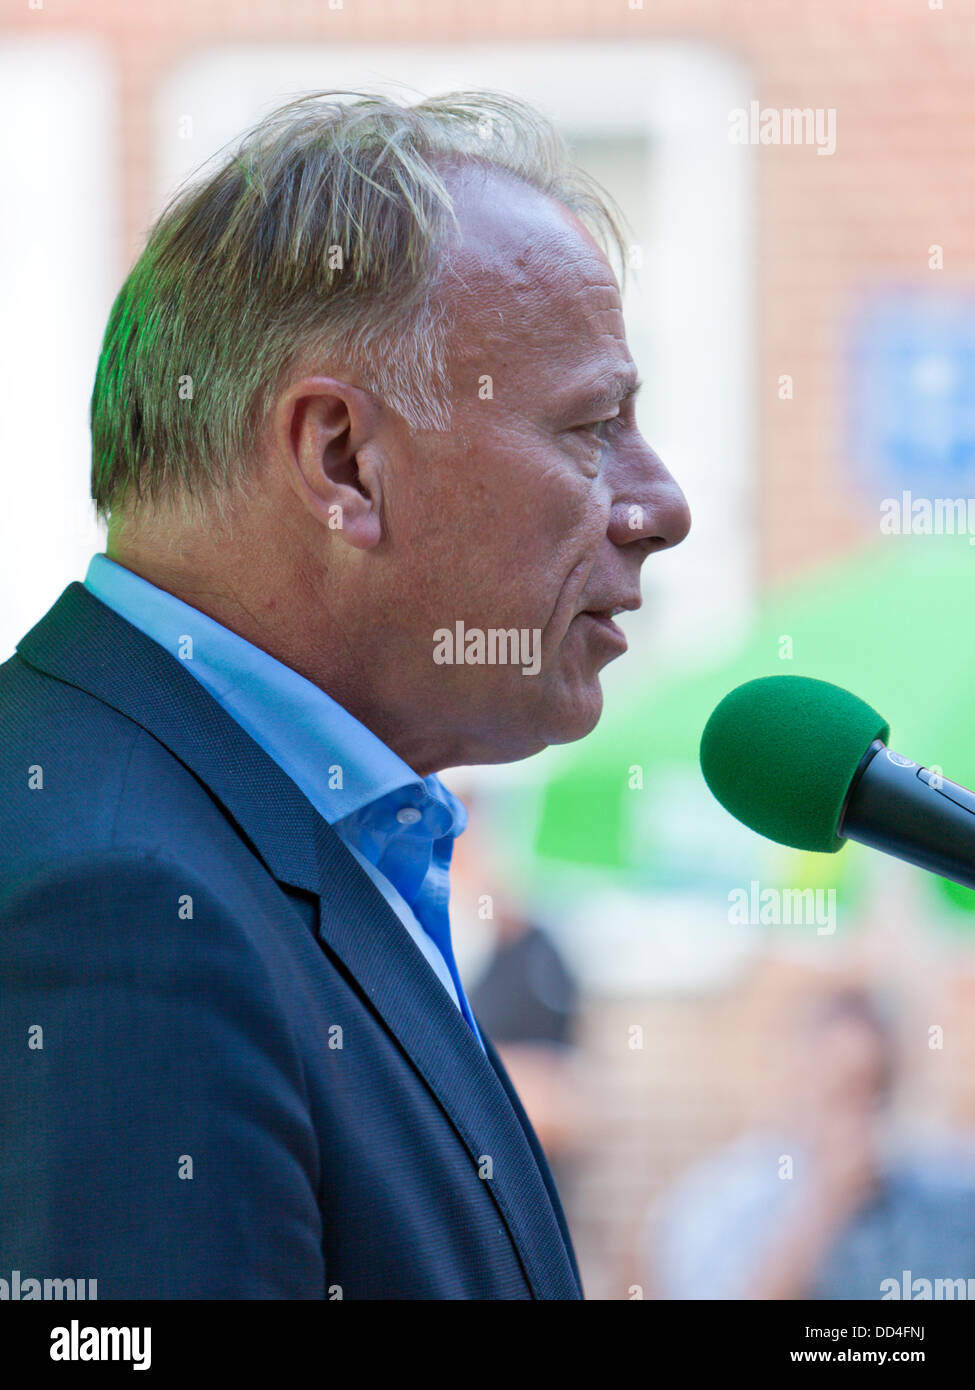 Lüneburg - Germany, August 24th, 2013: Jürgen Trittin, prime candidate of Bündnis 90/Die Grünen and former Federal Minister for the Environment, Nature Conservation and Nuclear Safety speaking at a pre-election party. Stock Photo